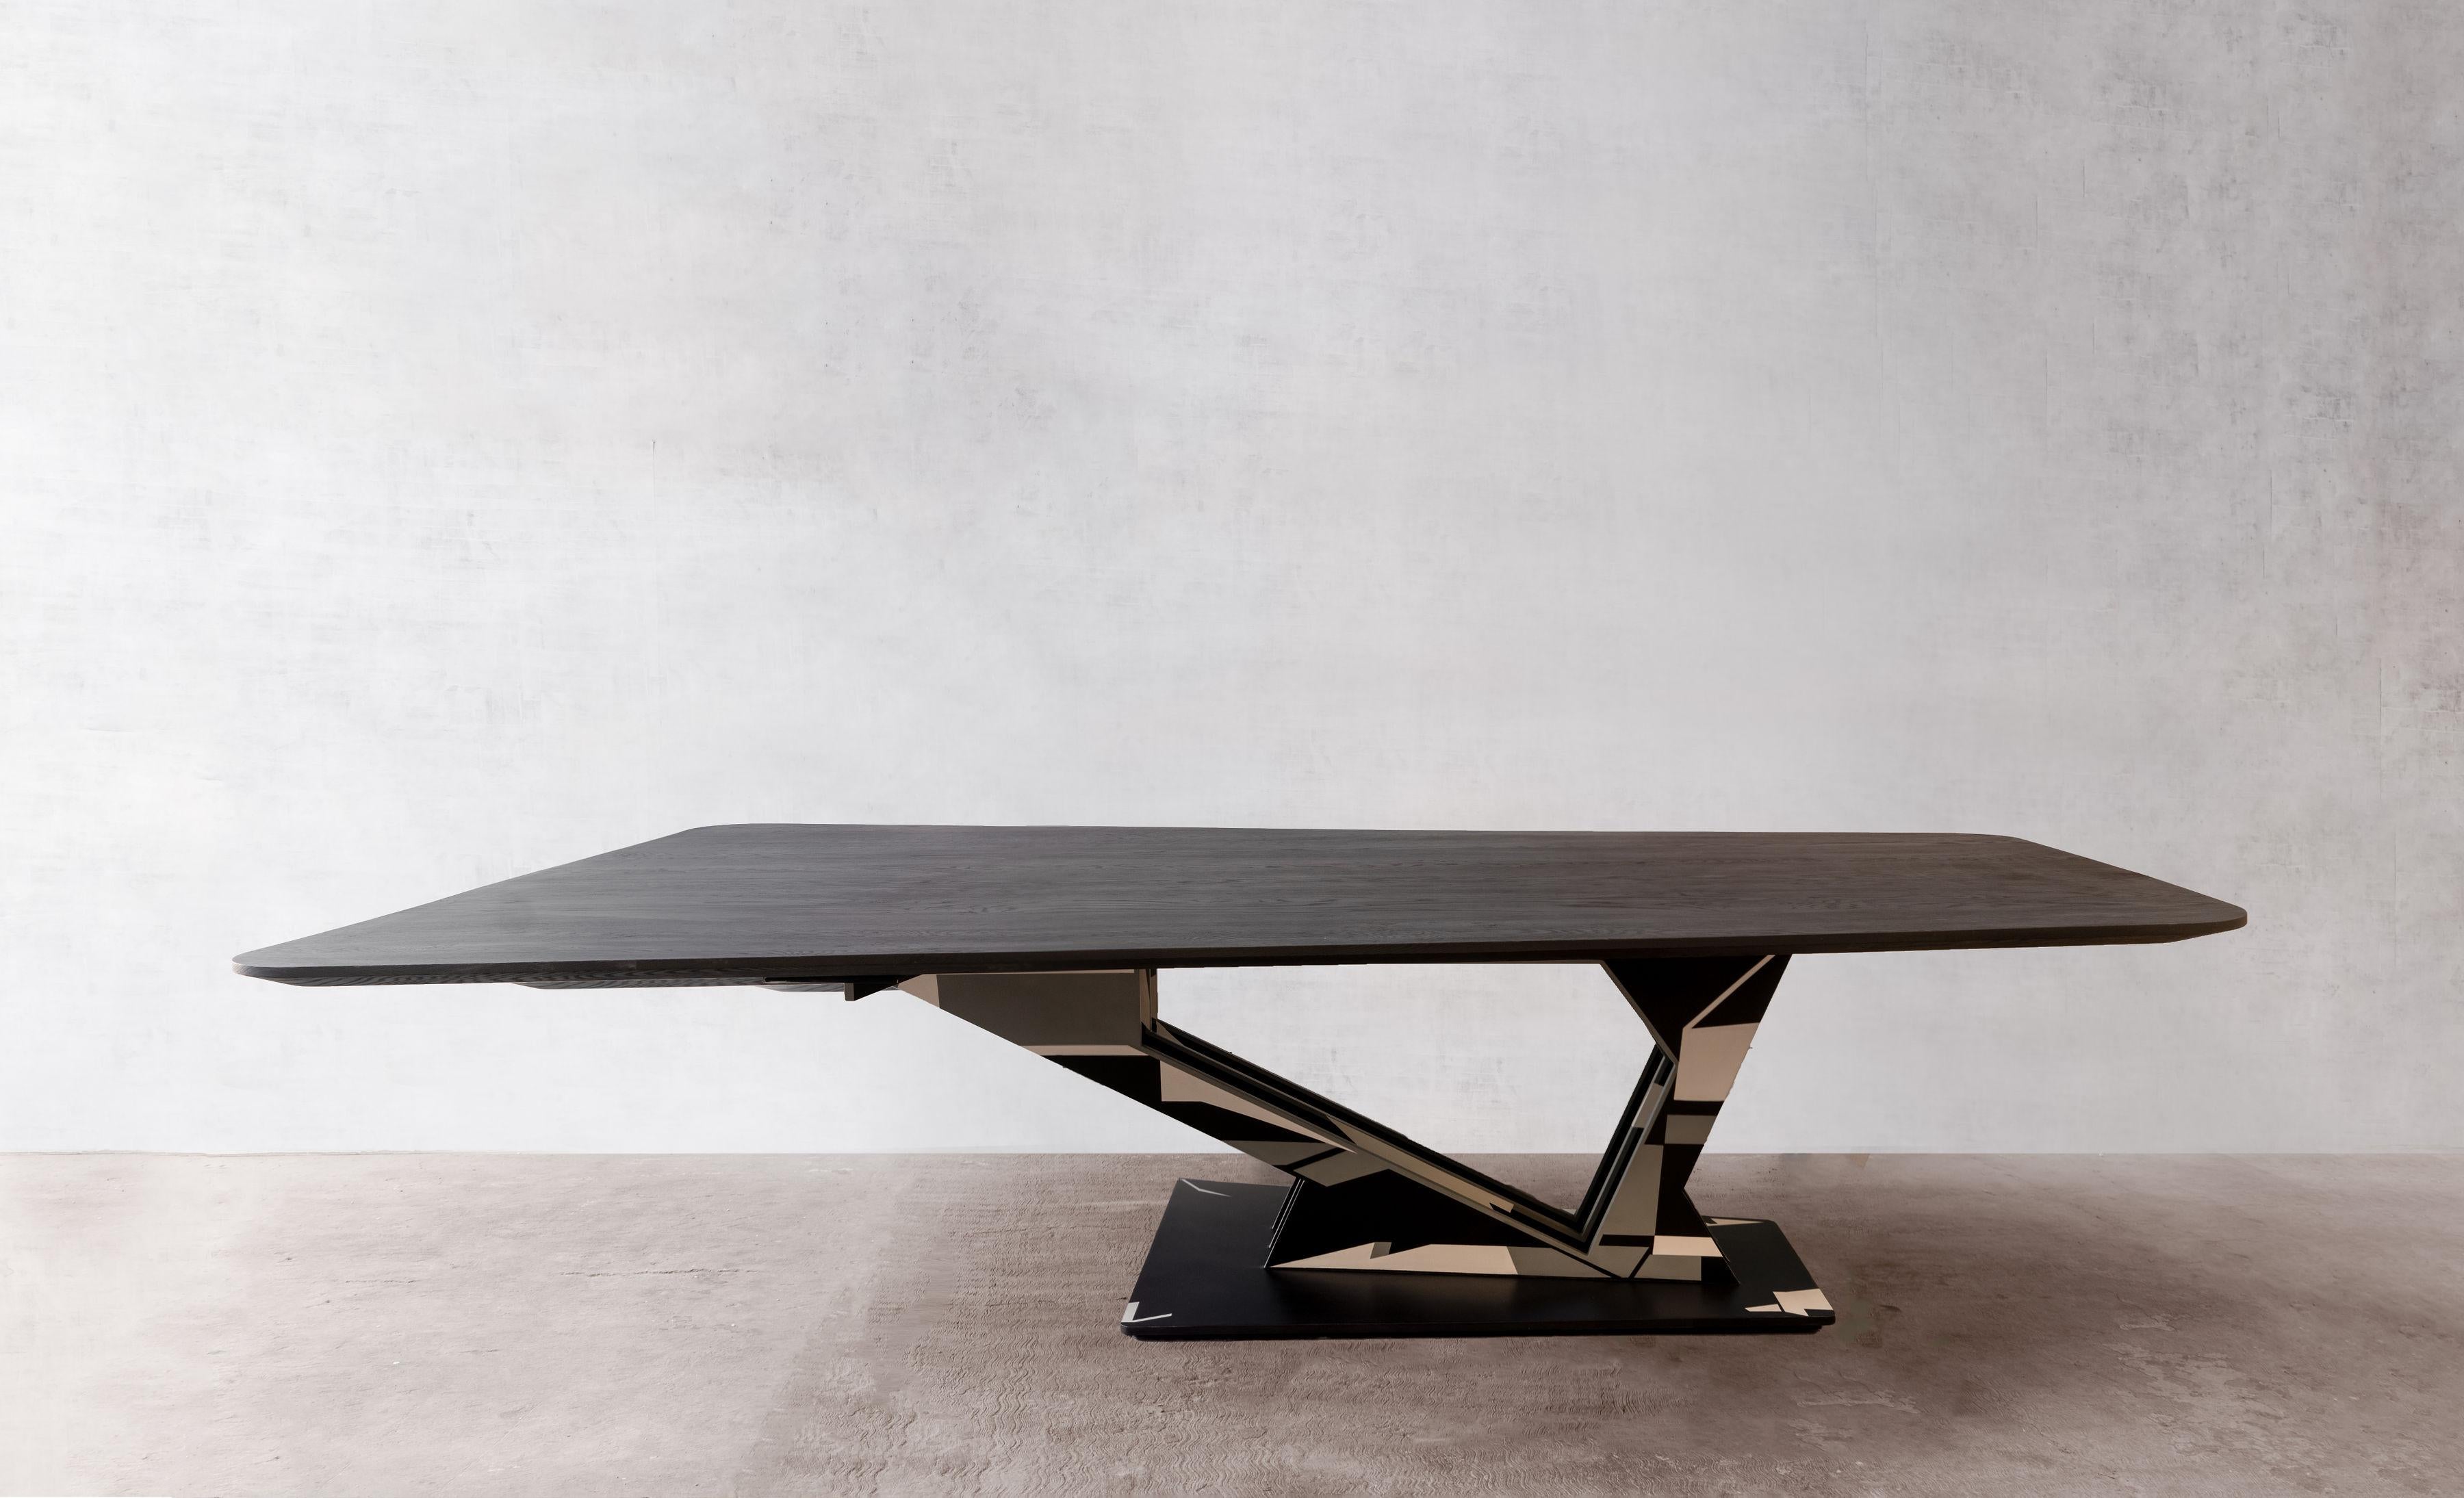 Ecliptic table by Arturo Verástegui
Dimensions: D 240 x W 100 x H 55 cm
Materials: oak wood, stainless steel.

Dining table made of burnt white oak and steel plate pedestal intervened by the master Raymundo Sesma.

Arturo Verástegui has been the